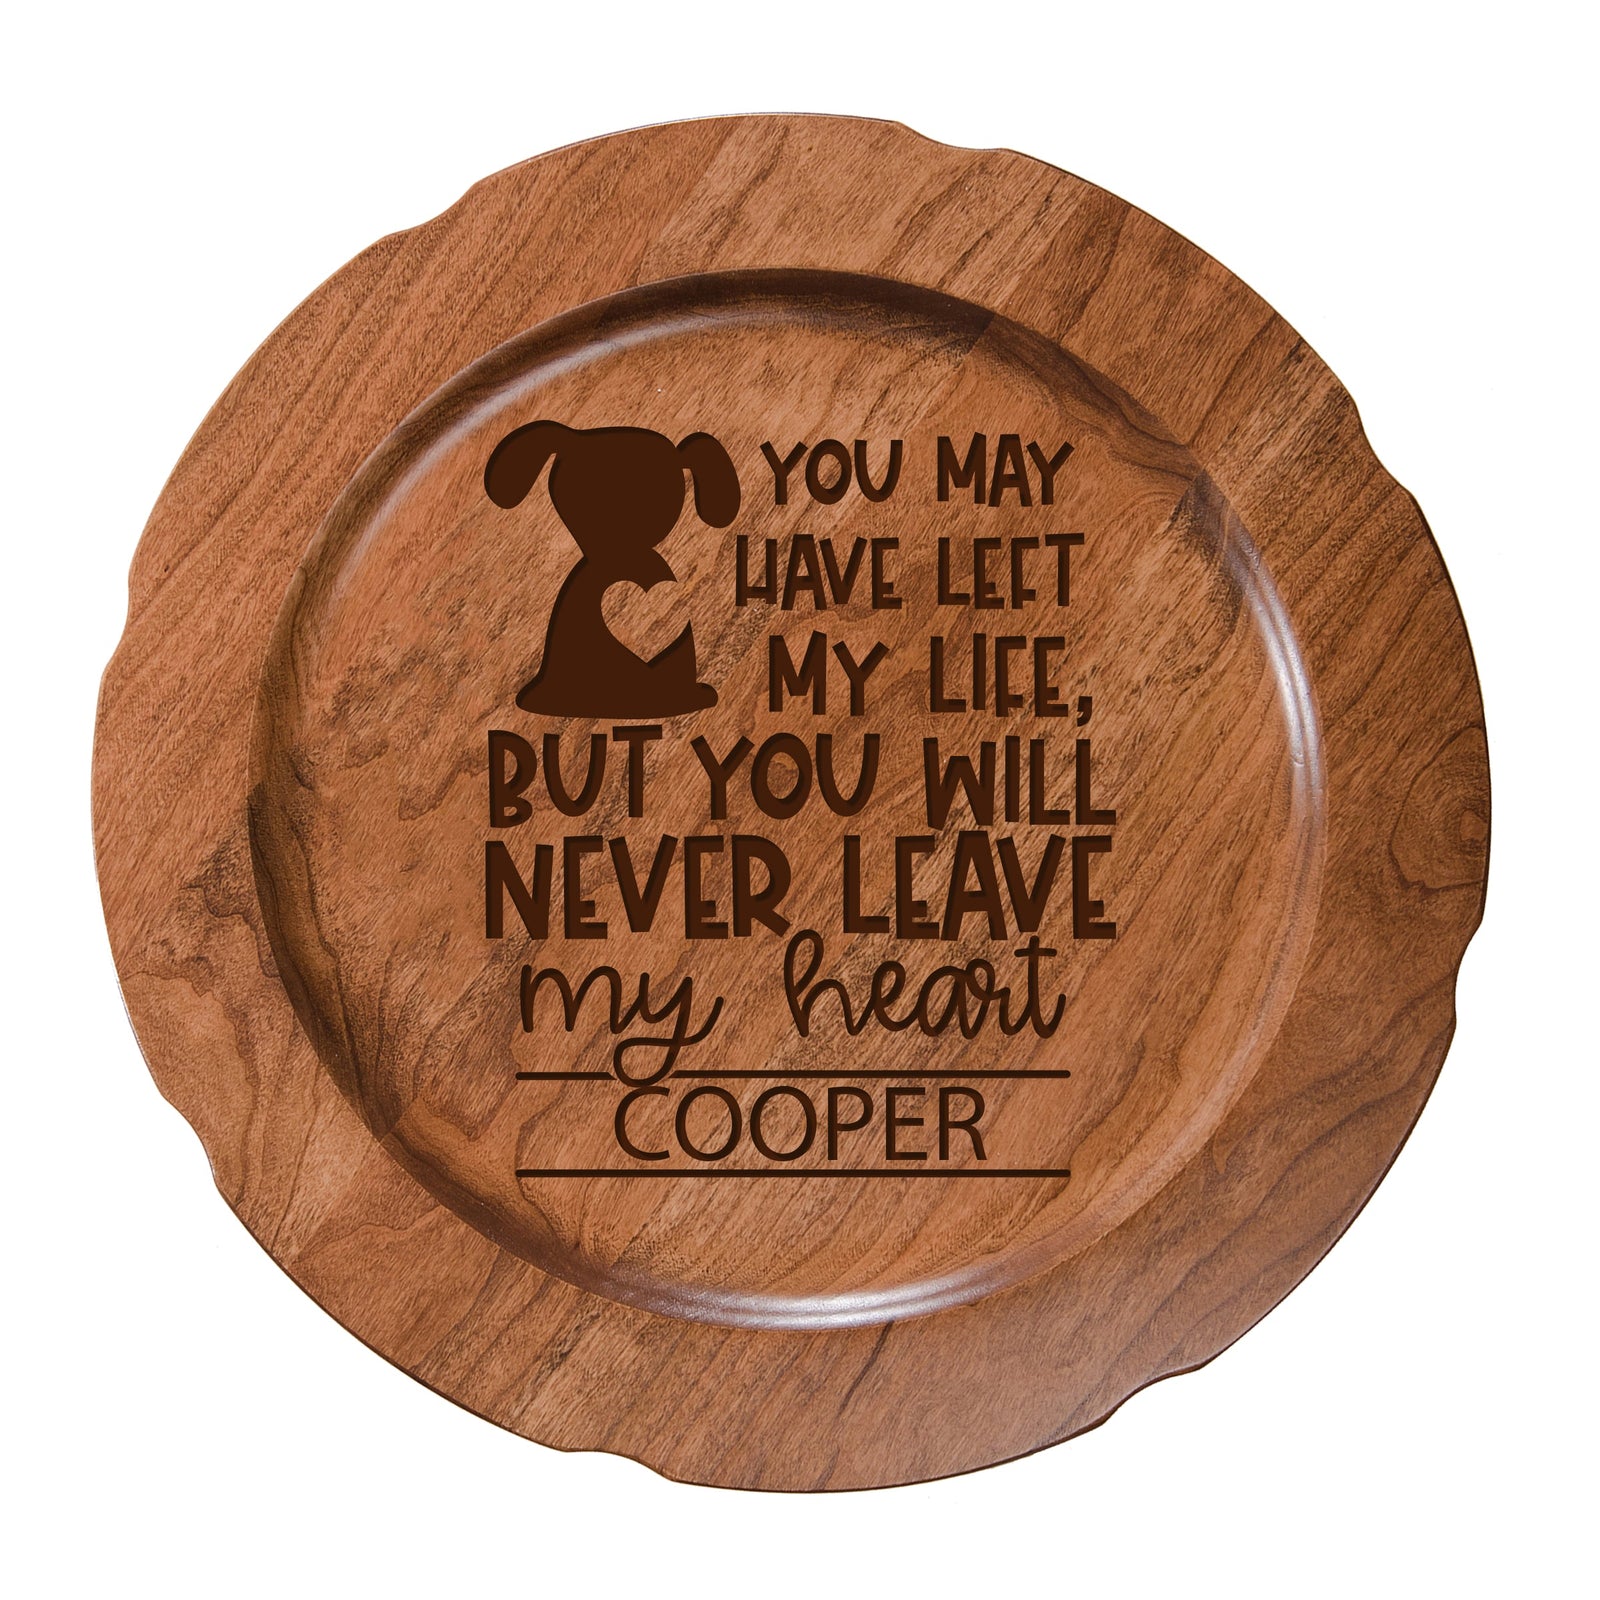 12" Cherry Pet Memorial Plate with phrase "You May Have Left My Life, But You Will Never Leave My Heart"